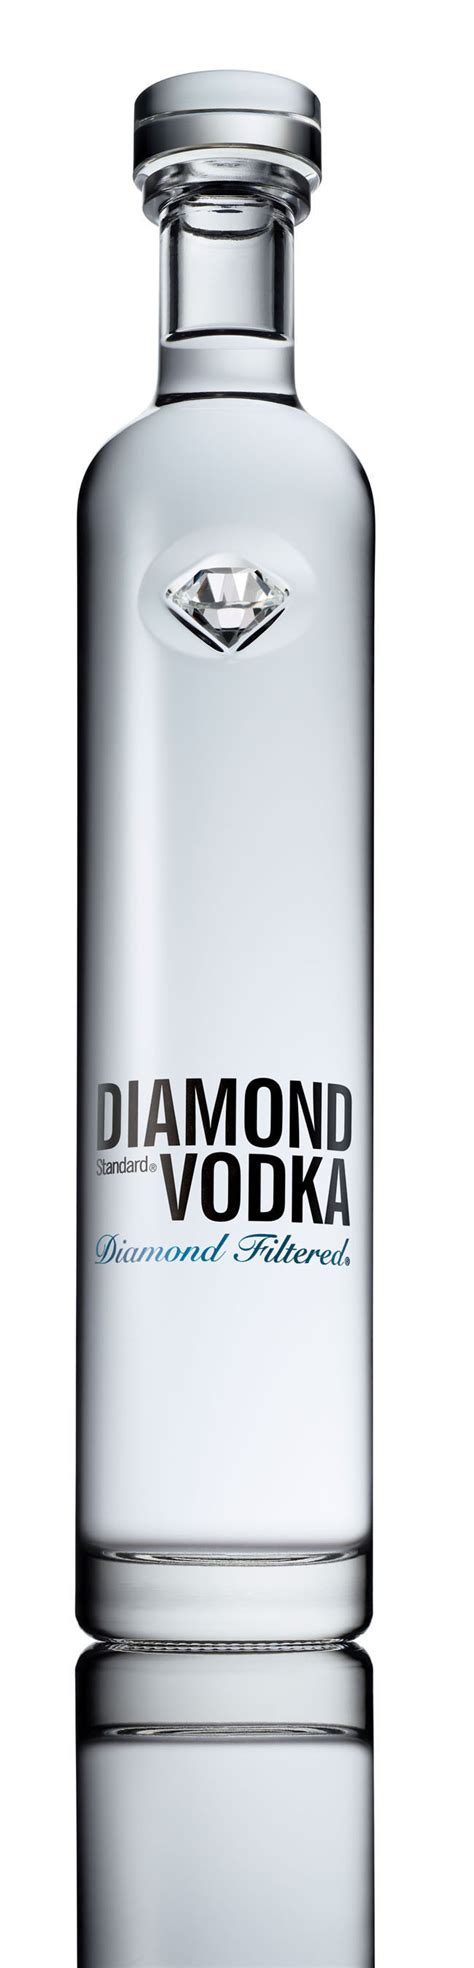 This Bottle Of Vodka Is Very Plain But It Is Also Very Prestigious Looking And Would Be